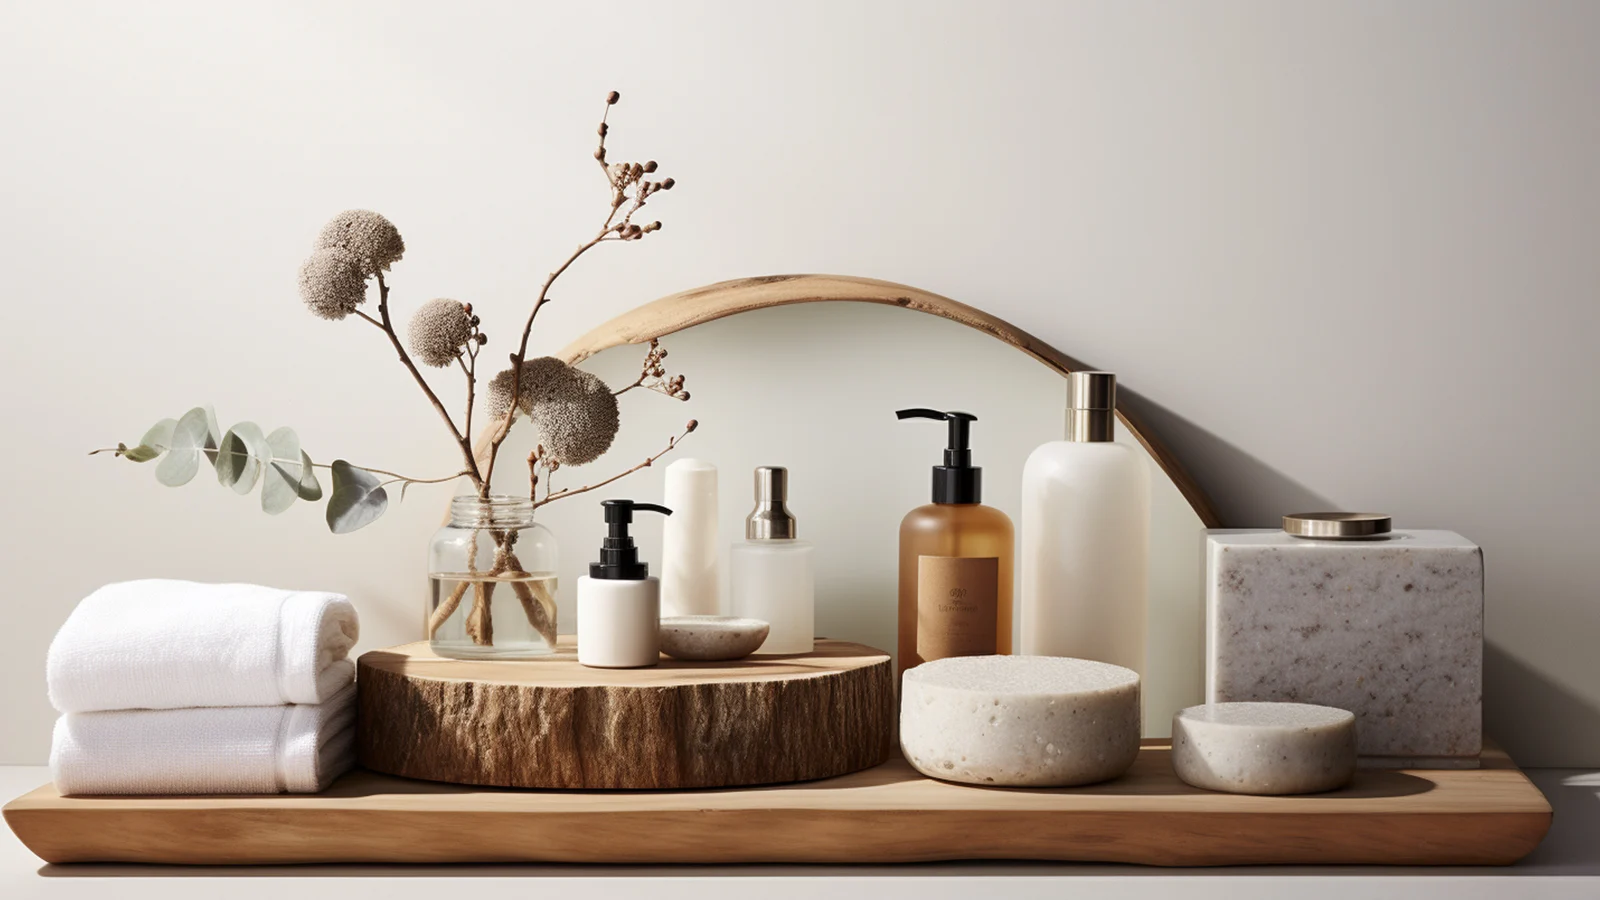 Small bathroom counter decorating ideas: a wooden shelf with soaps, lotions, and a mirror.